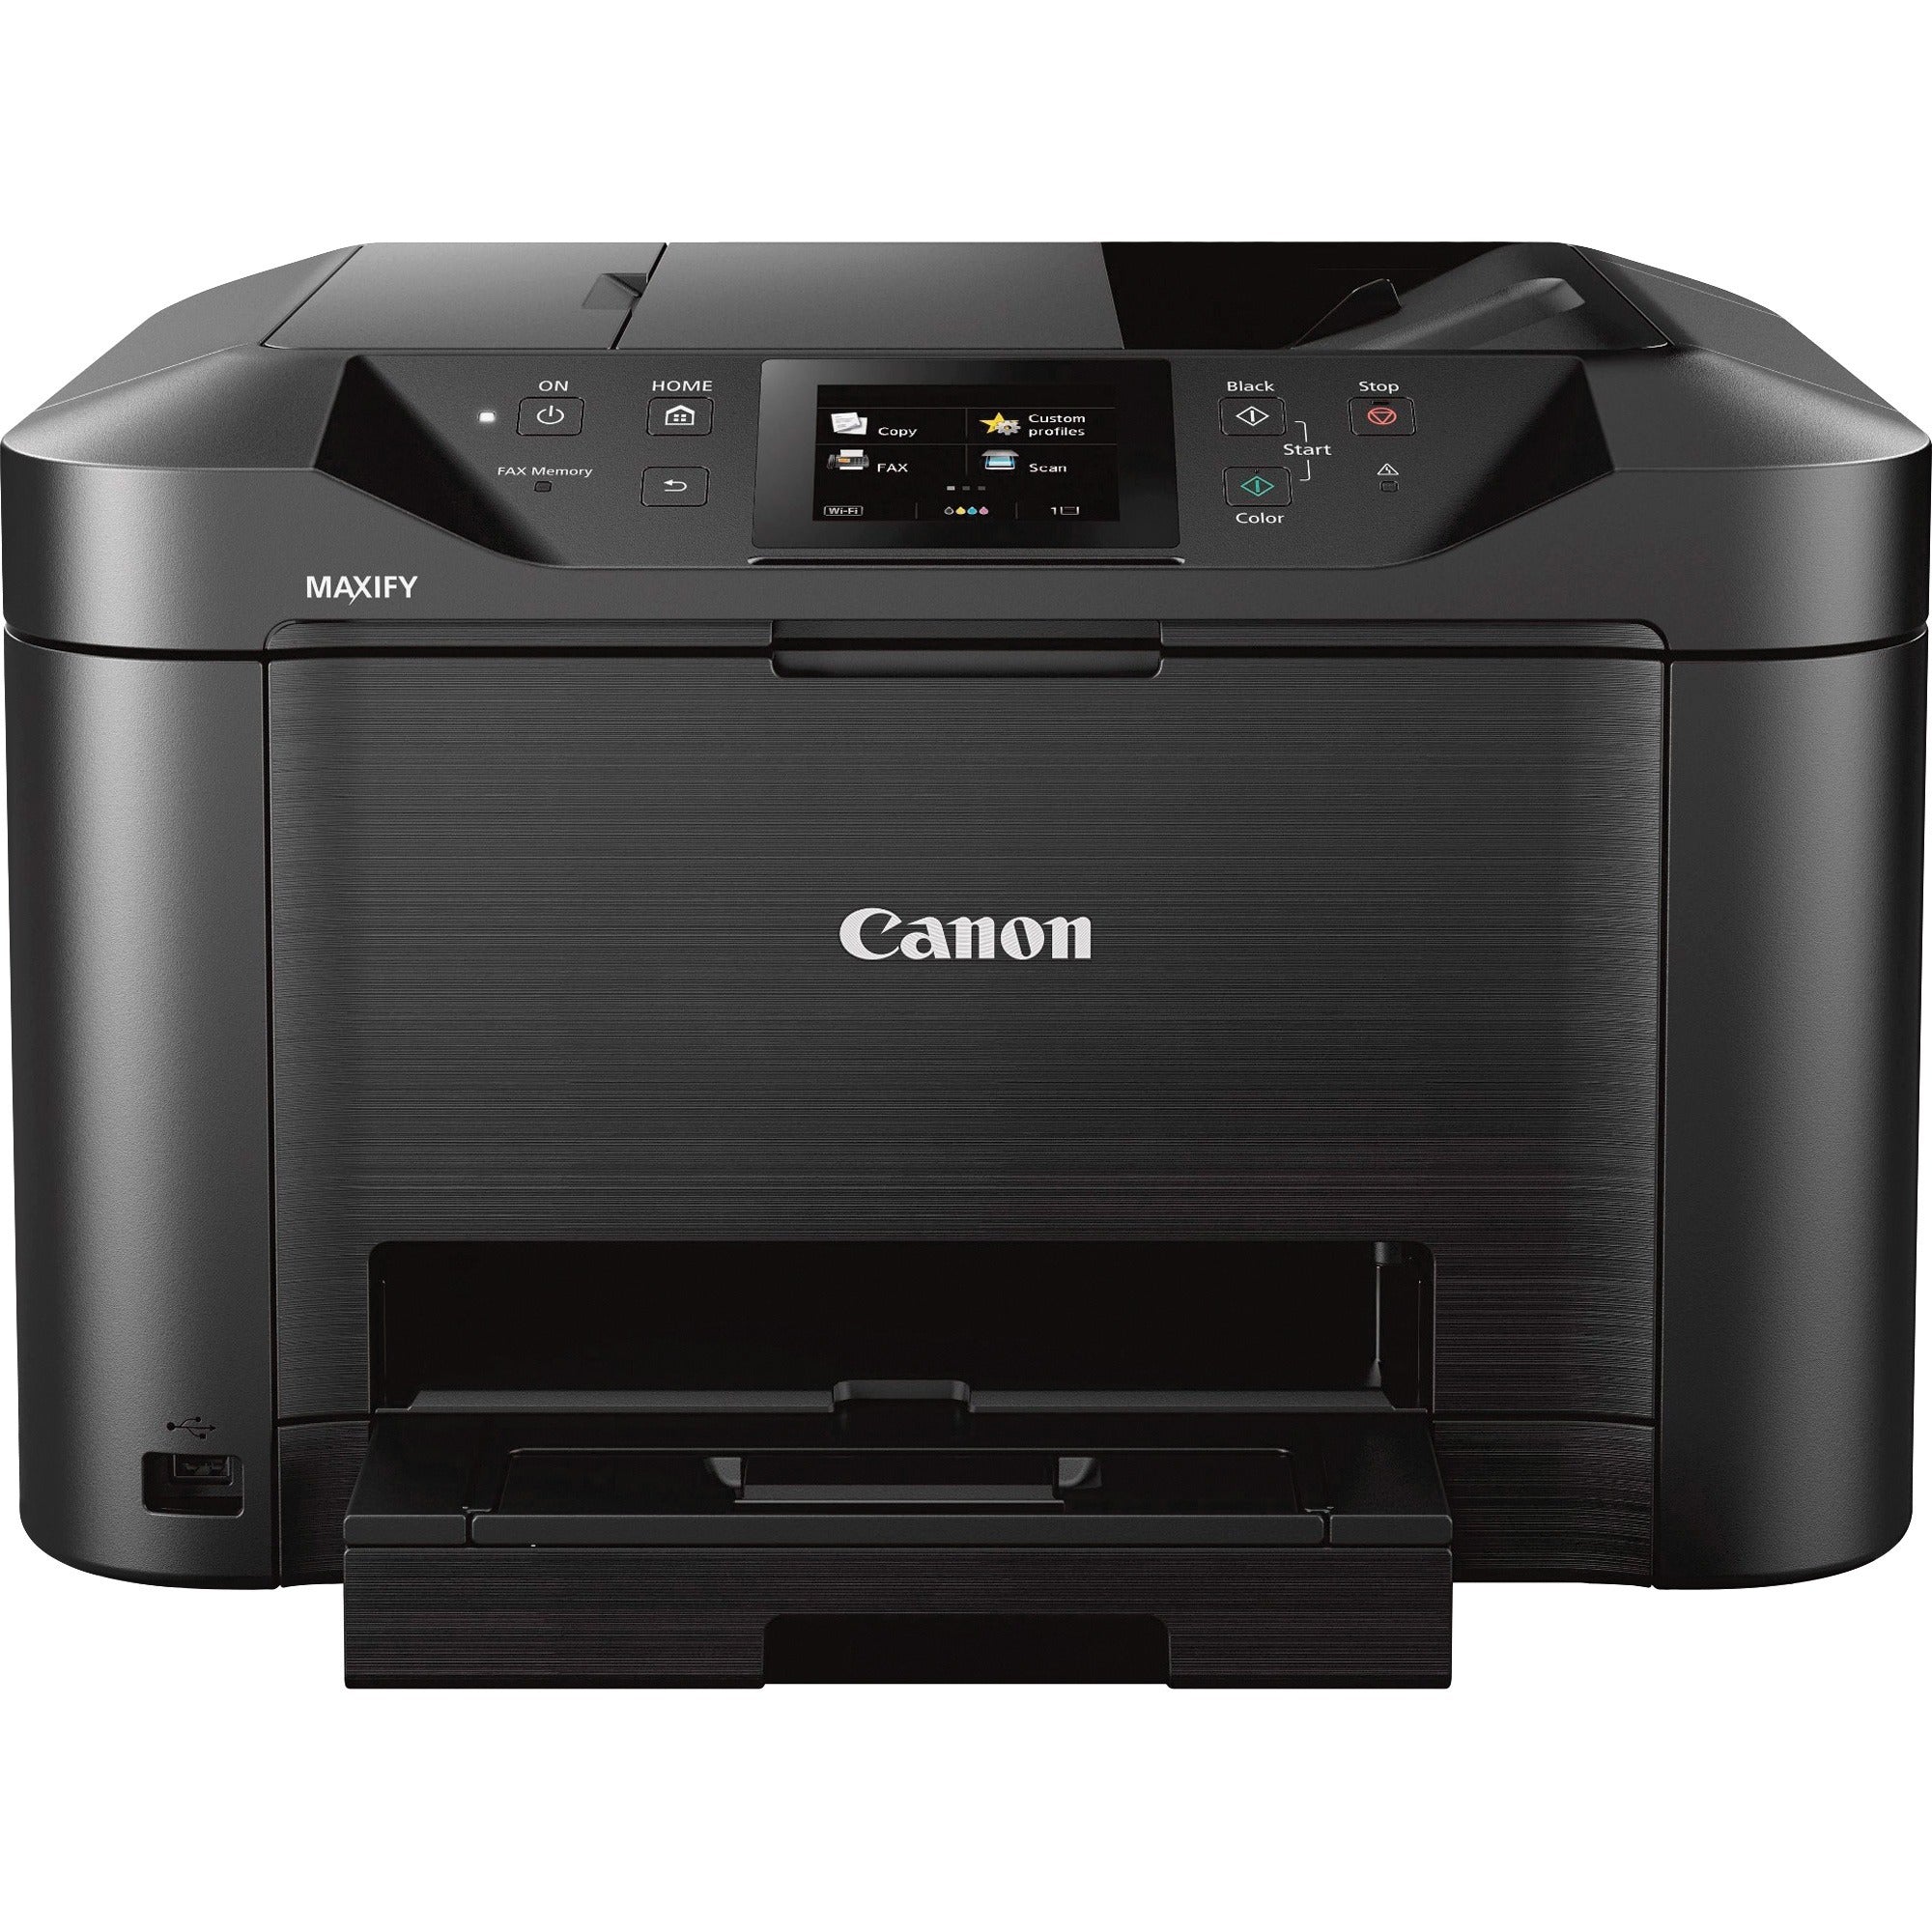 Canon MAXIFY MB5120 Wireless Inkjet Multifunction Printer - Color - Copier/Fax/Printer/Scanner - 600 x 1200 dpi Print - Automatic Duplex Print - 250 sheets Input - Color Scanner - 1200 dpi Optical Scan - Color Fax - Ethernet - Wireless LAN - Mopria - - 1